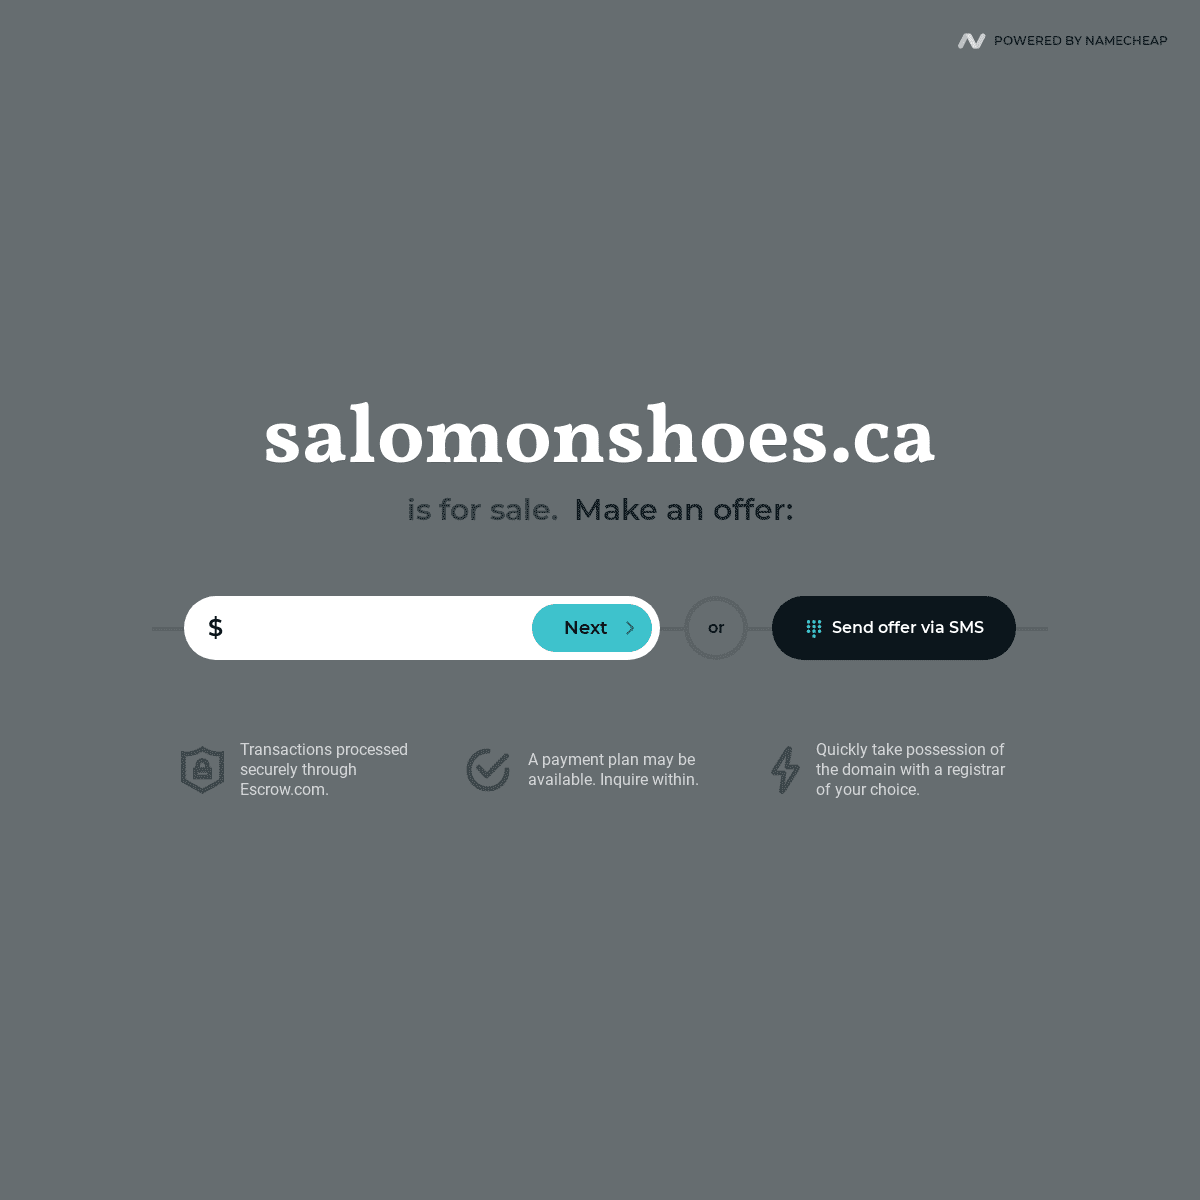 A complete backup of https://salomonshoes.ca